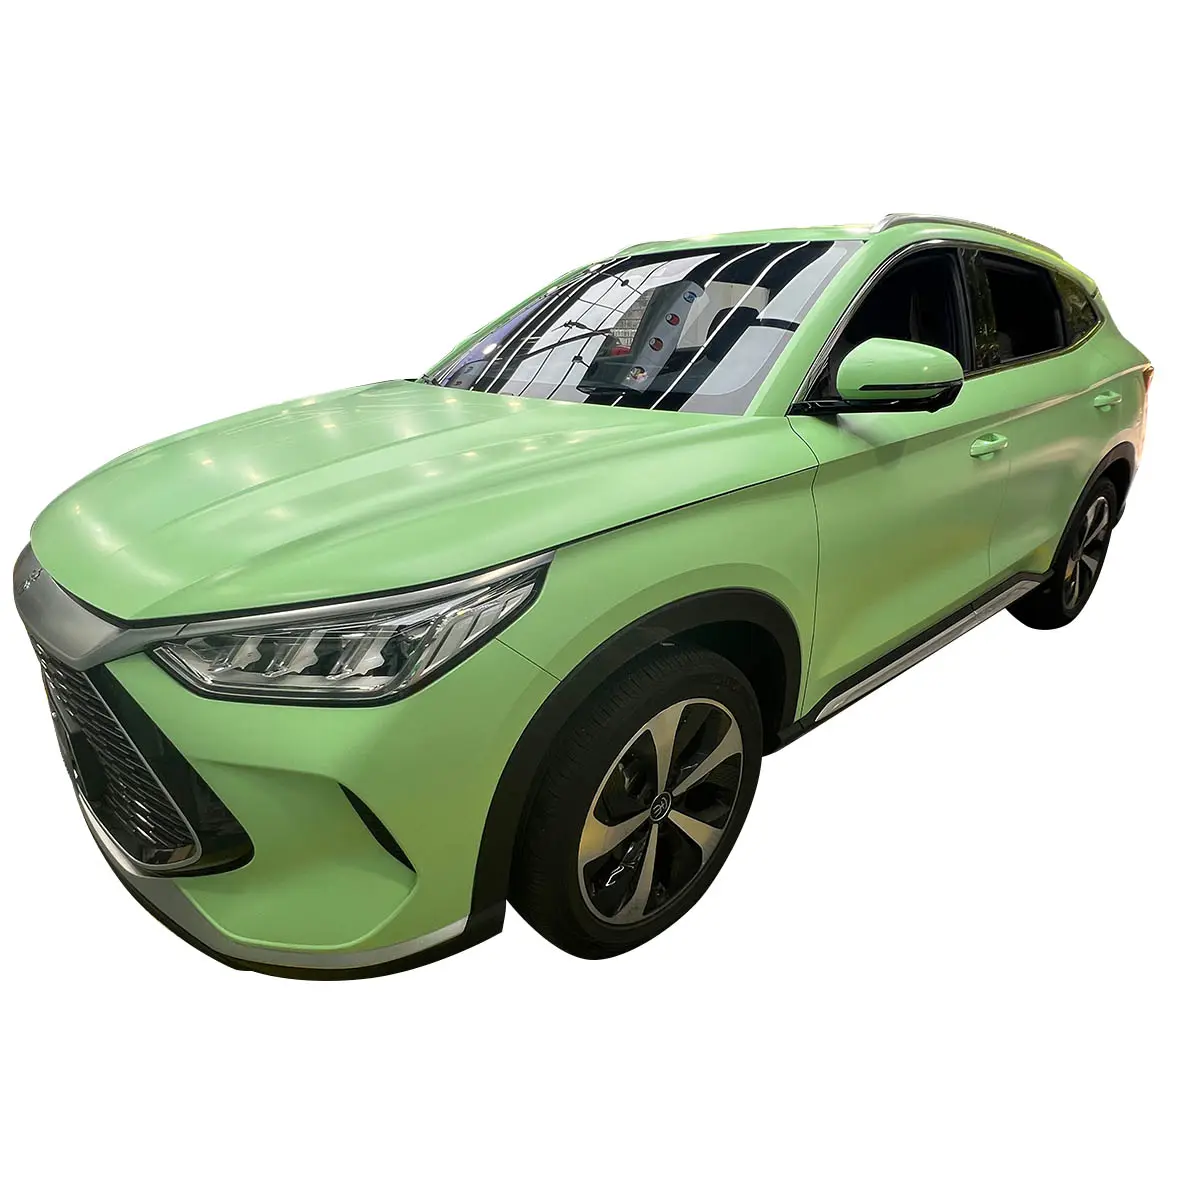 Car Wrapping Film PVC Glossy Magic Diamond Matte Green Vinyl Car Wrap Foil Car Body Changing With Air Release Film